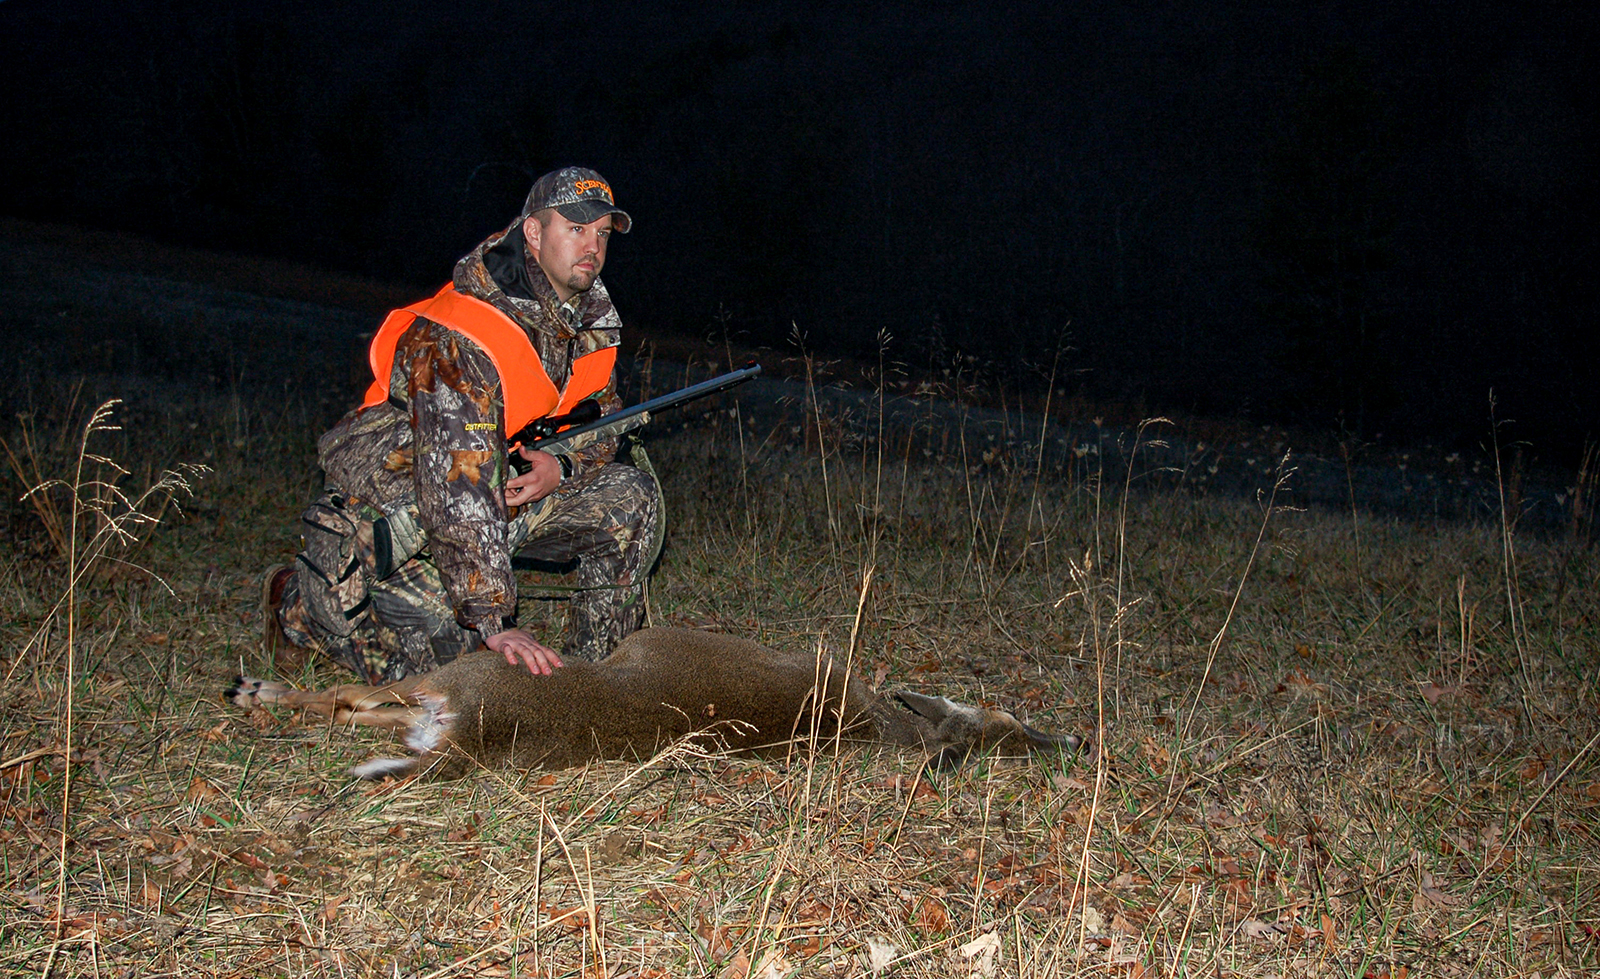 A hunter with gun and dressed in camouflage kneels next to a deer lying on the ground in the dark.